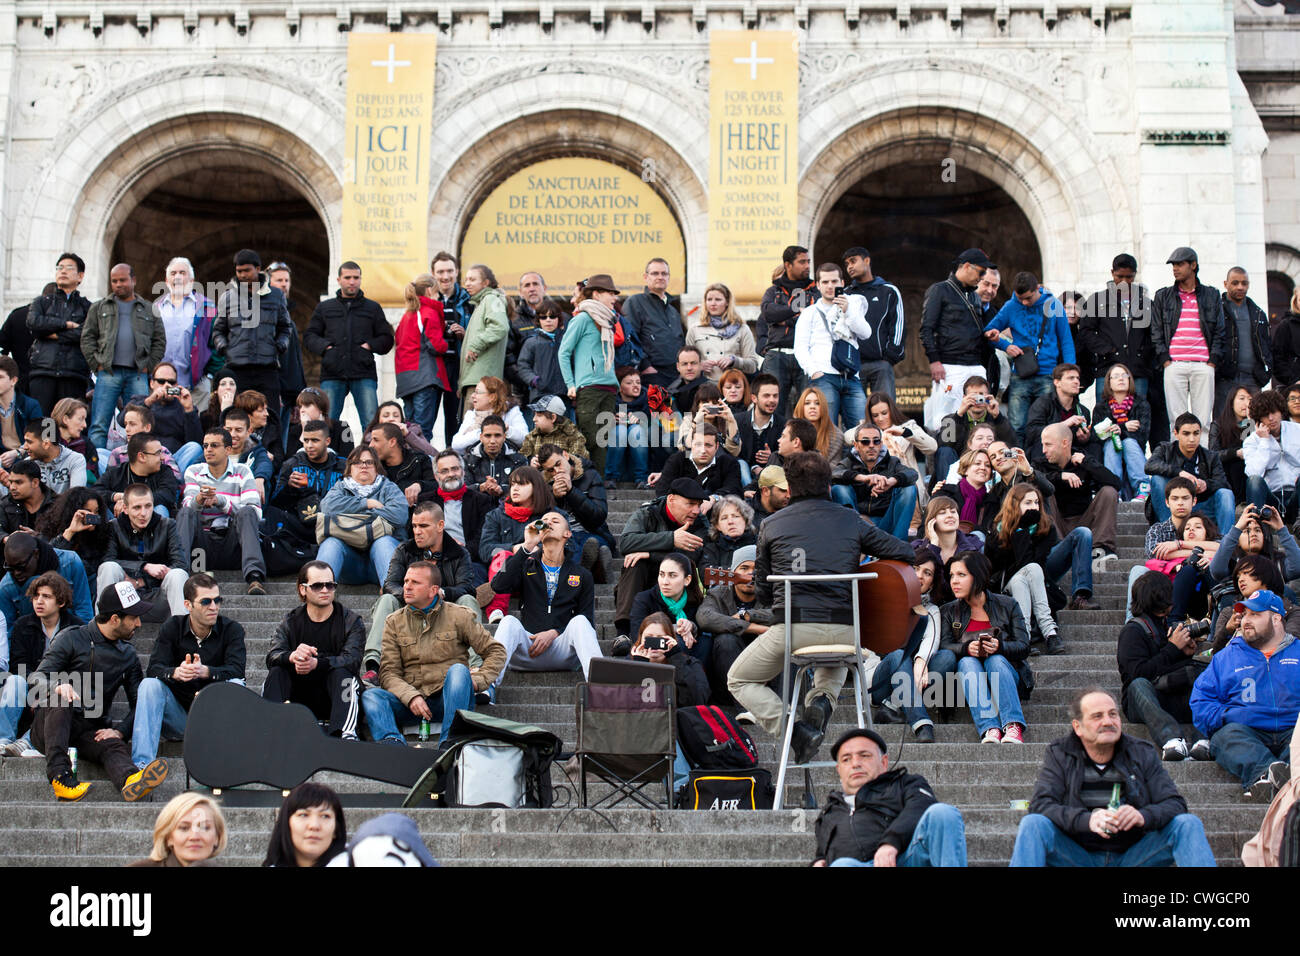 A crowd of tourists listen to a musician perform on the steps of the Sacre Couer, Paris. Stock Photo